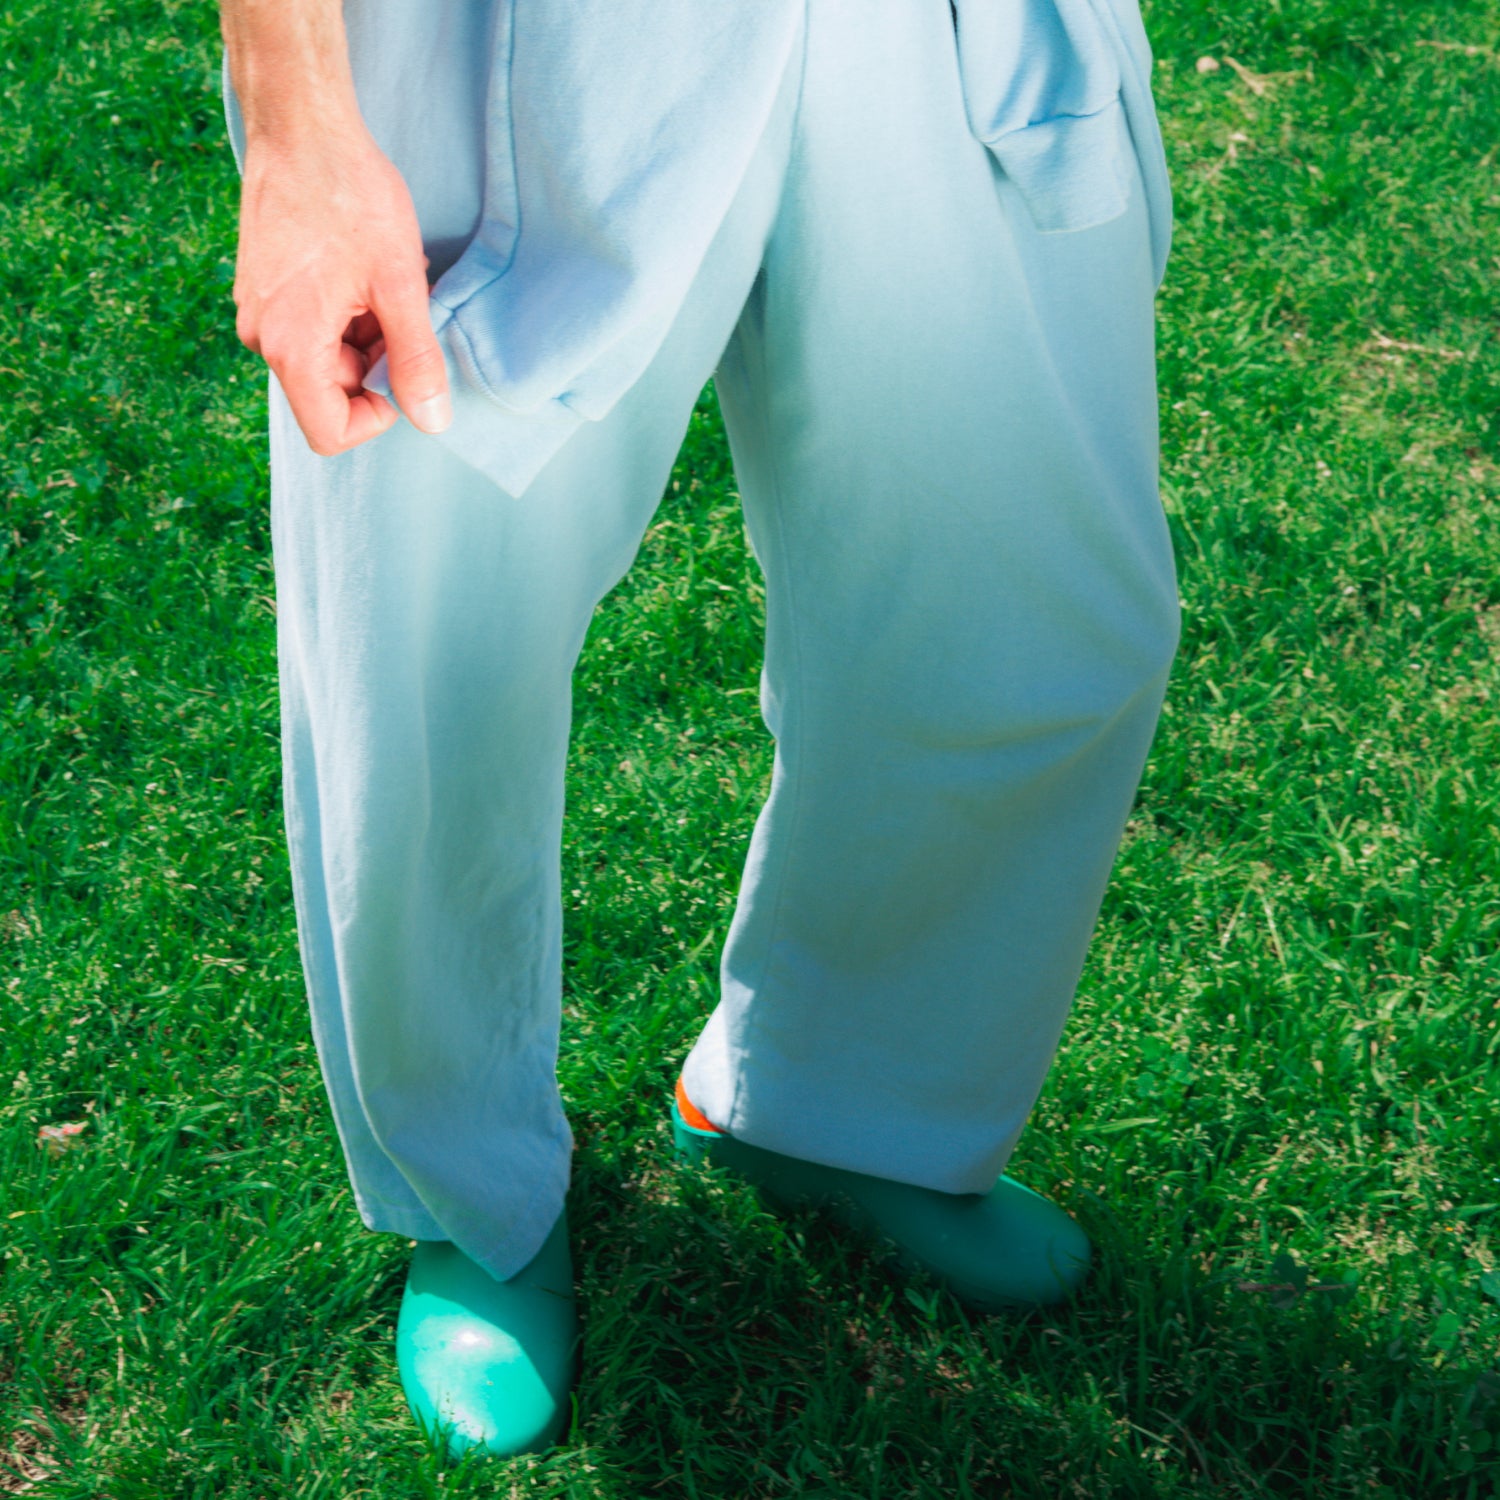 Image of a model's legs standing on lush green grass, he is wearing Apartment Pants and Calzuro Clogs